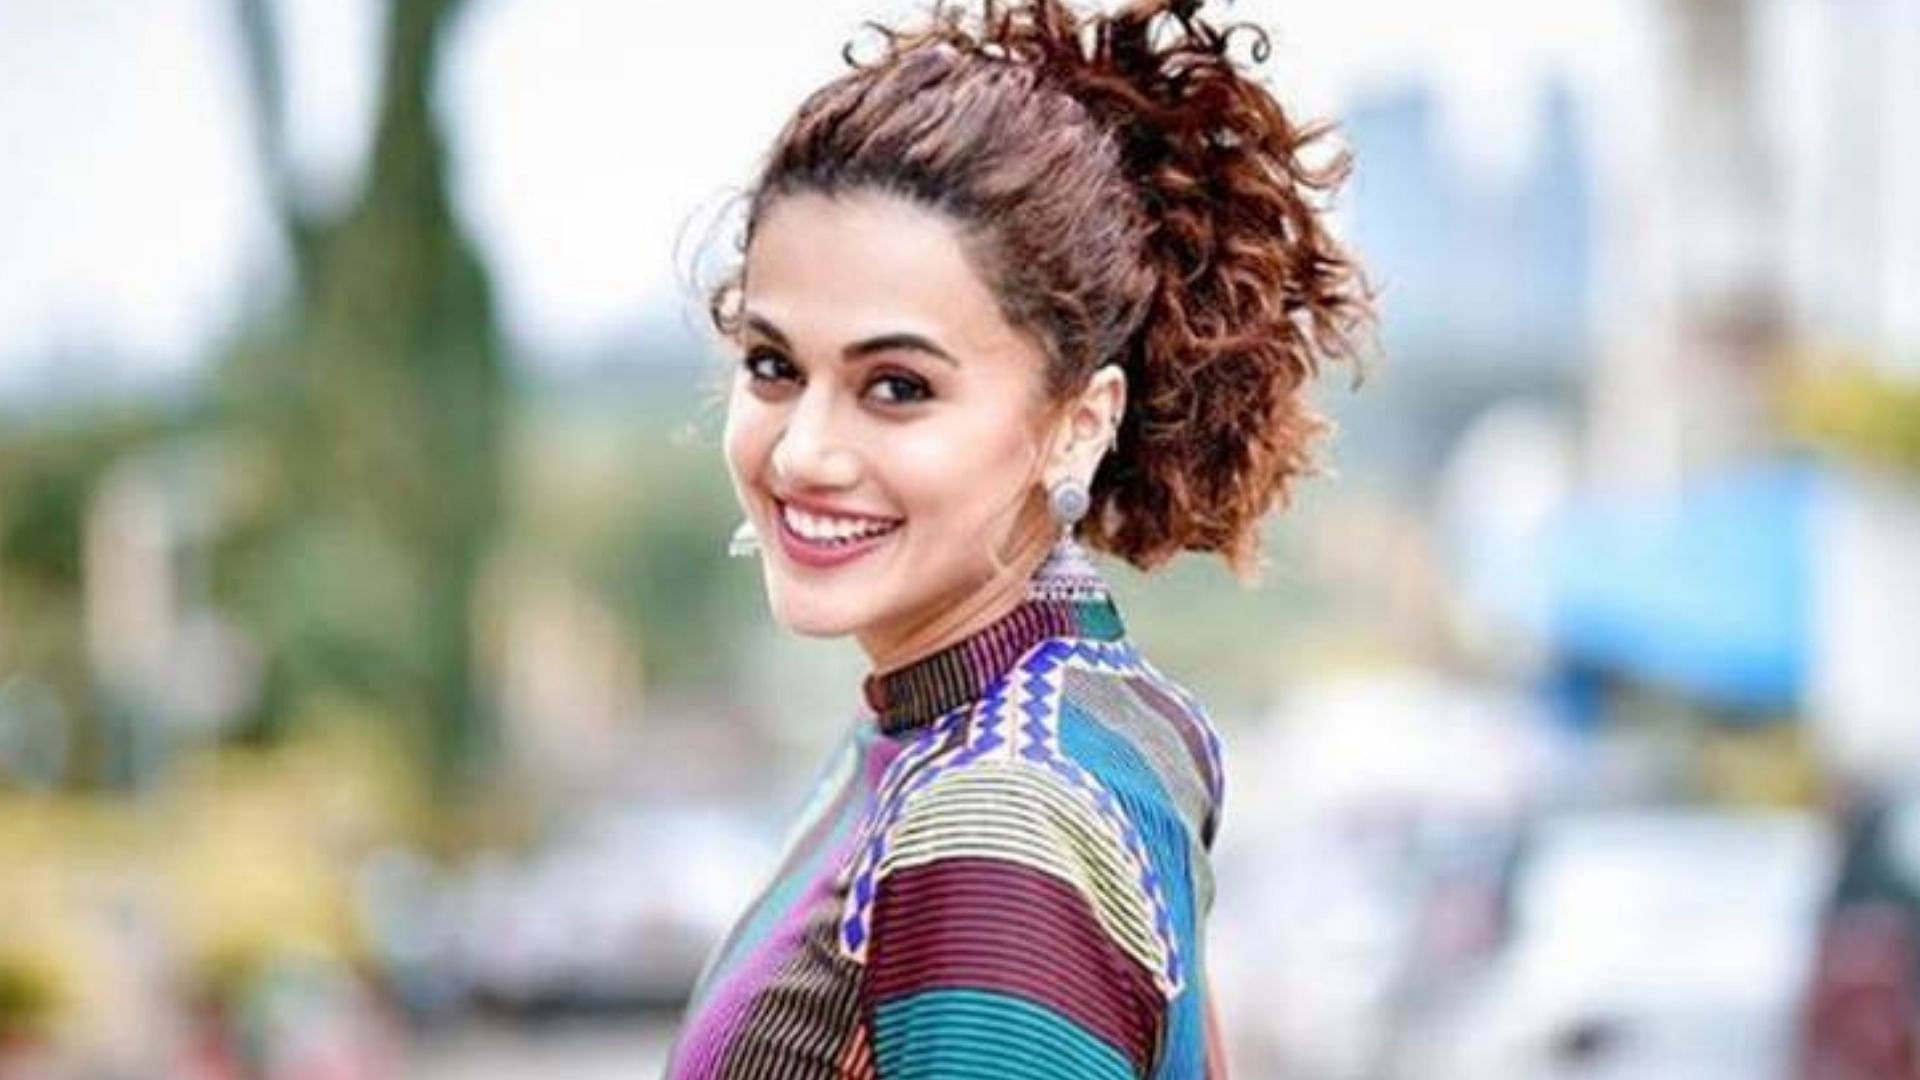 Taapsee Pannu will no longer star in the remake of <i>Pati, Patni Aur Woh</i>.